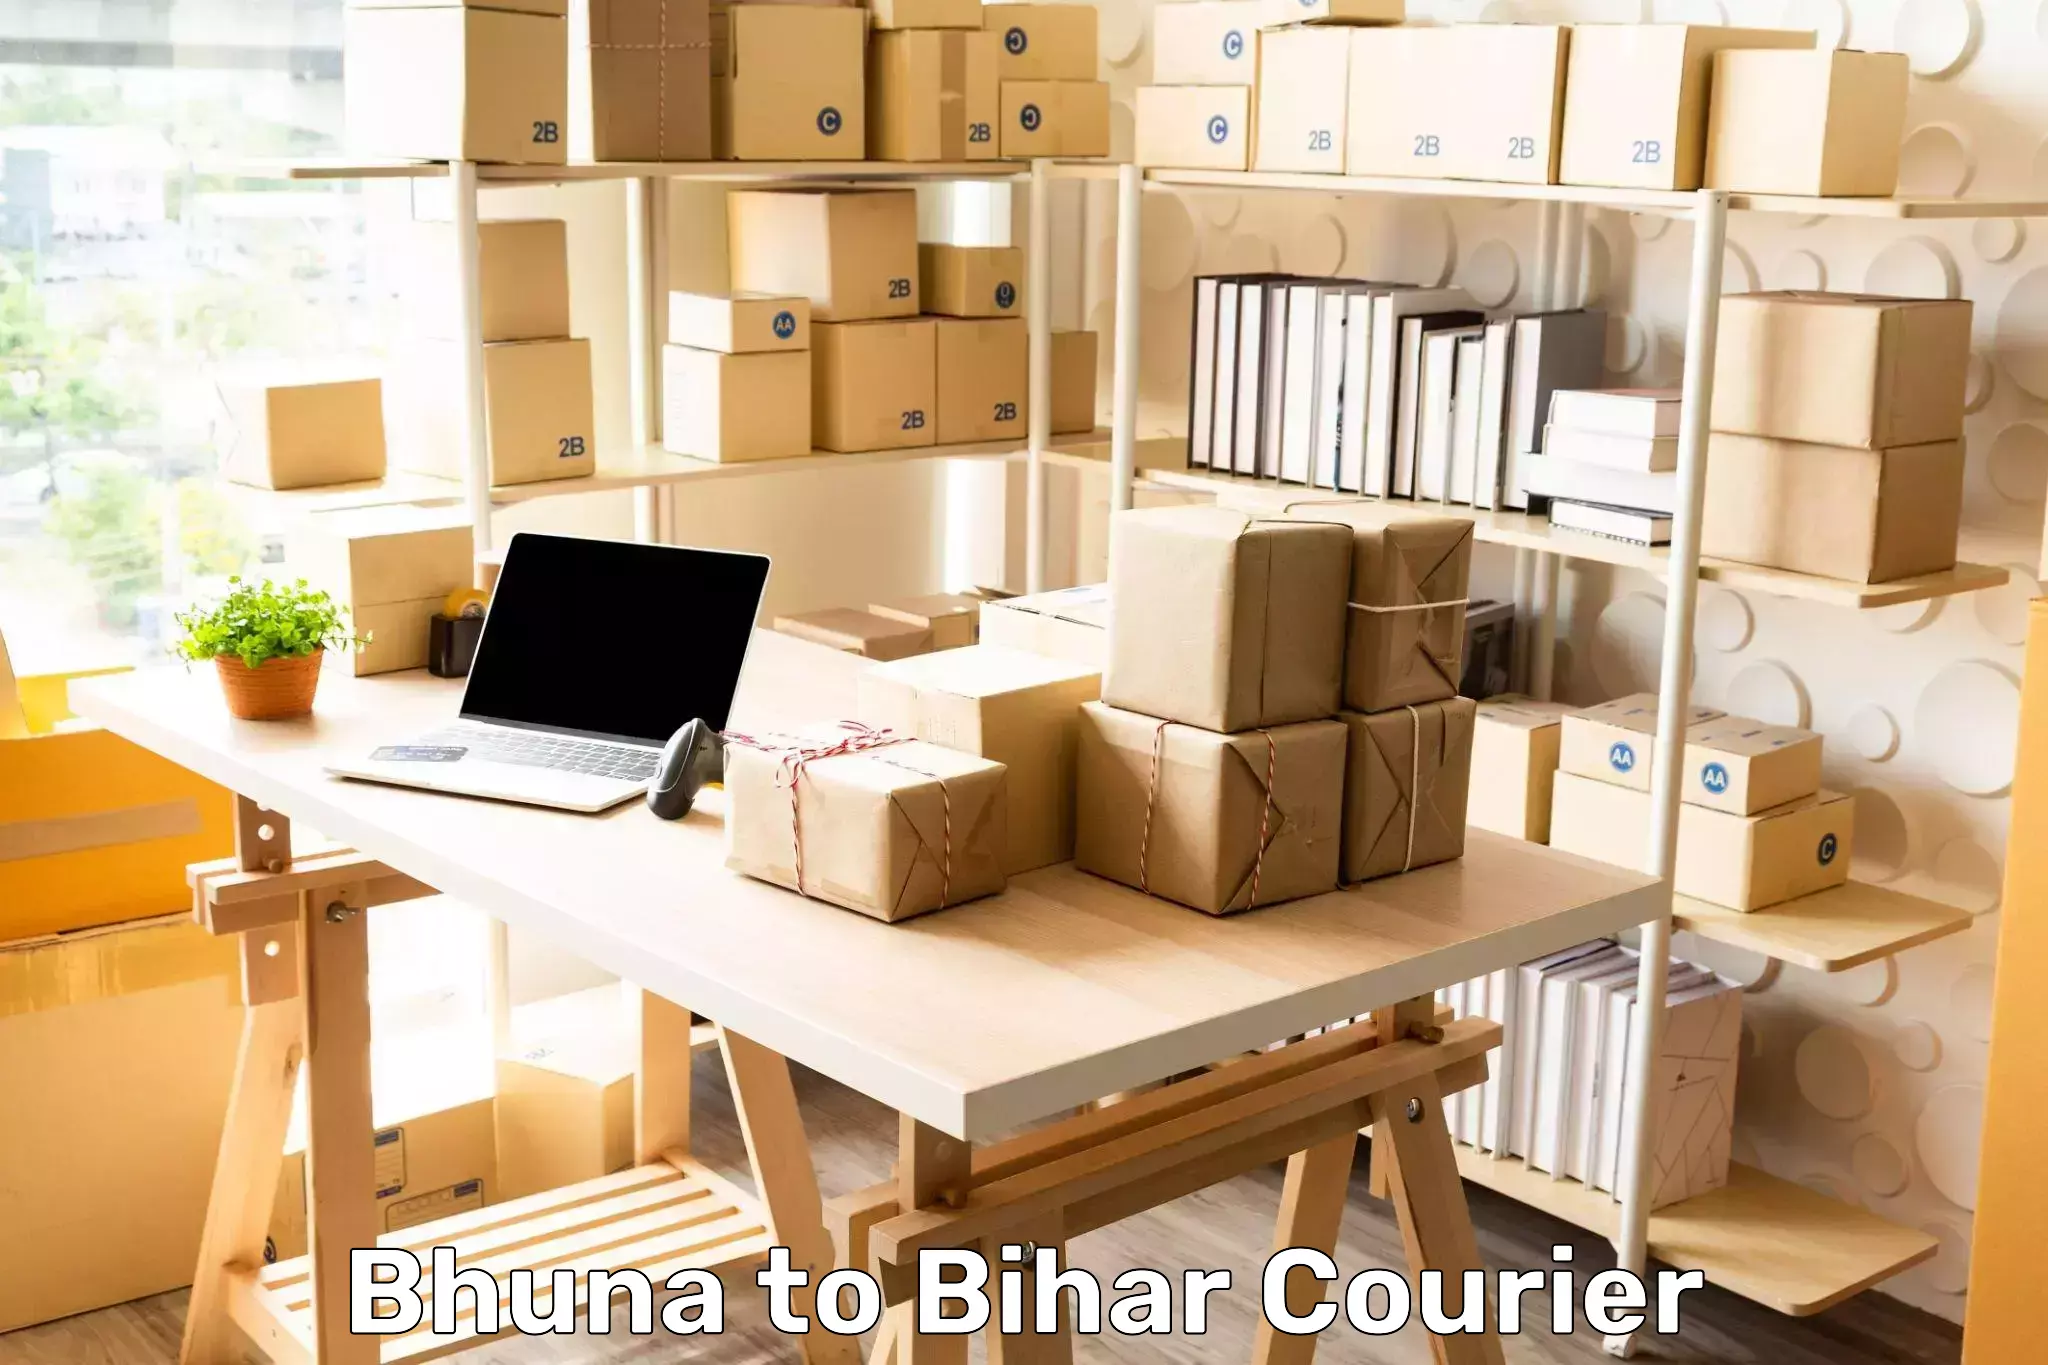 End-to-end delivery in Bhuna to Bihar